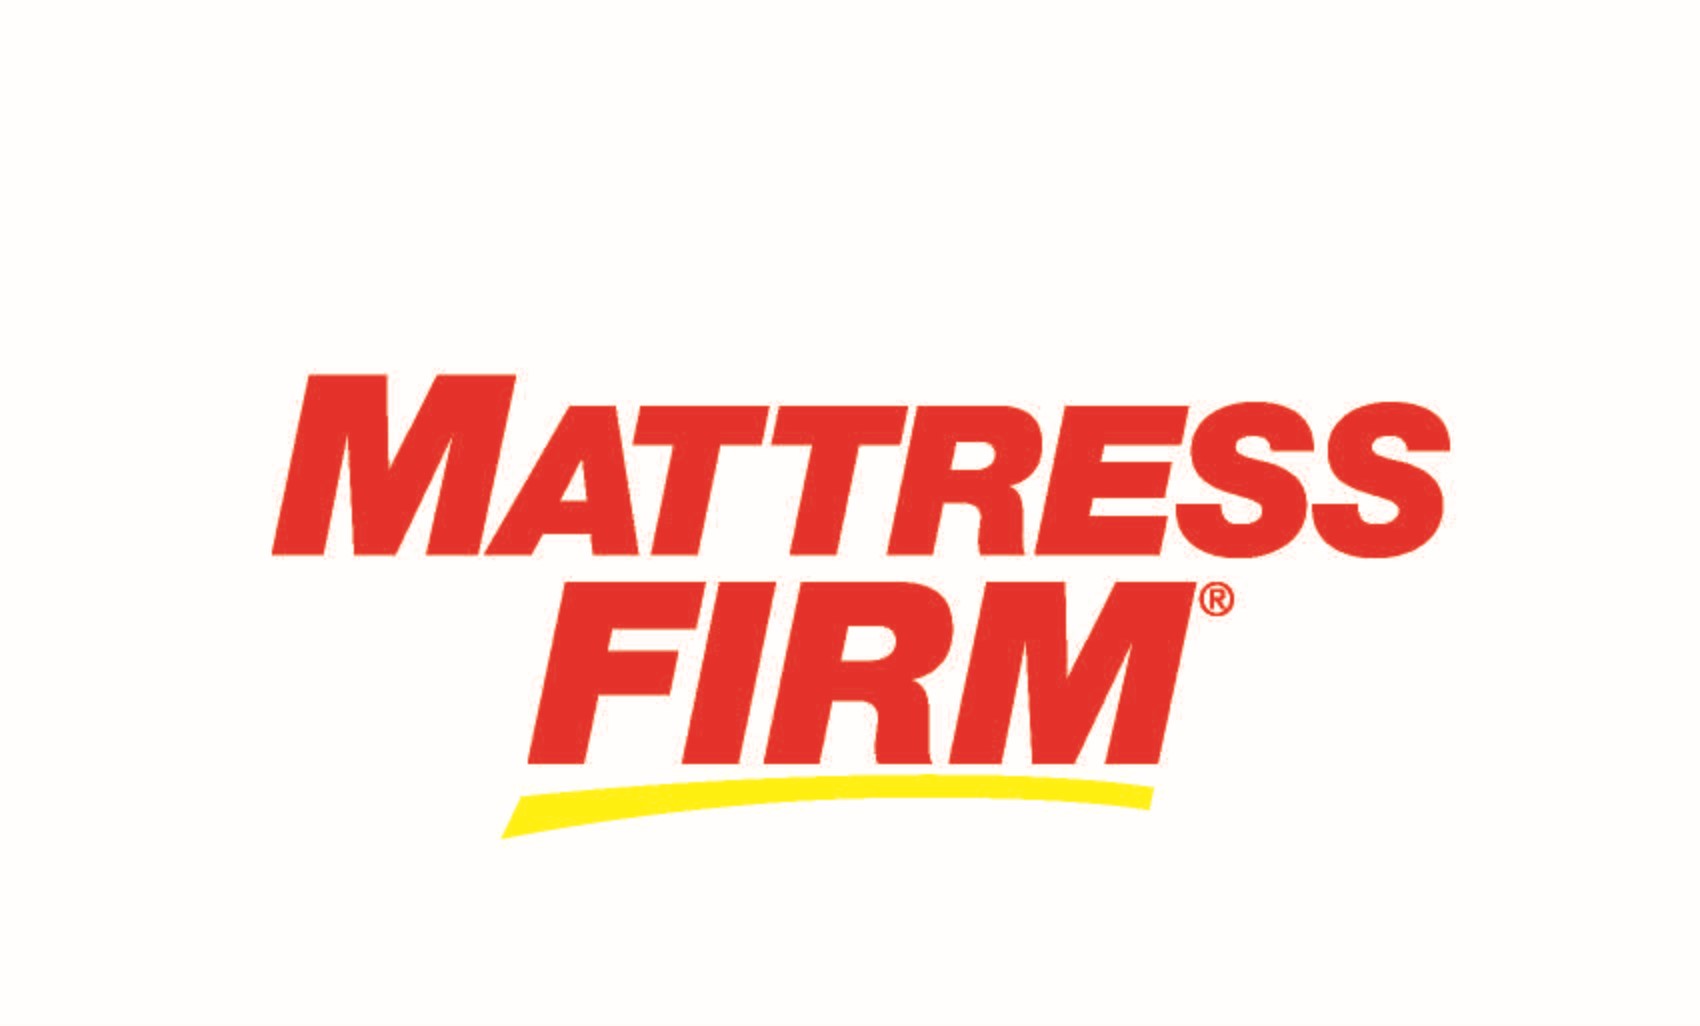 Mattress Firm After-Party Prizes